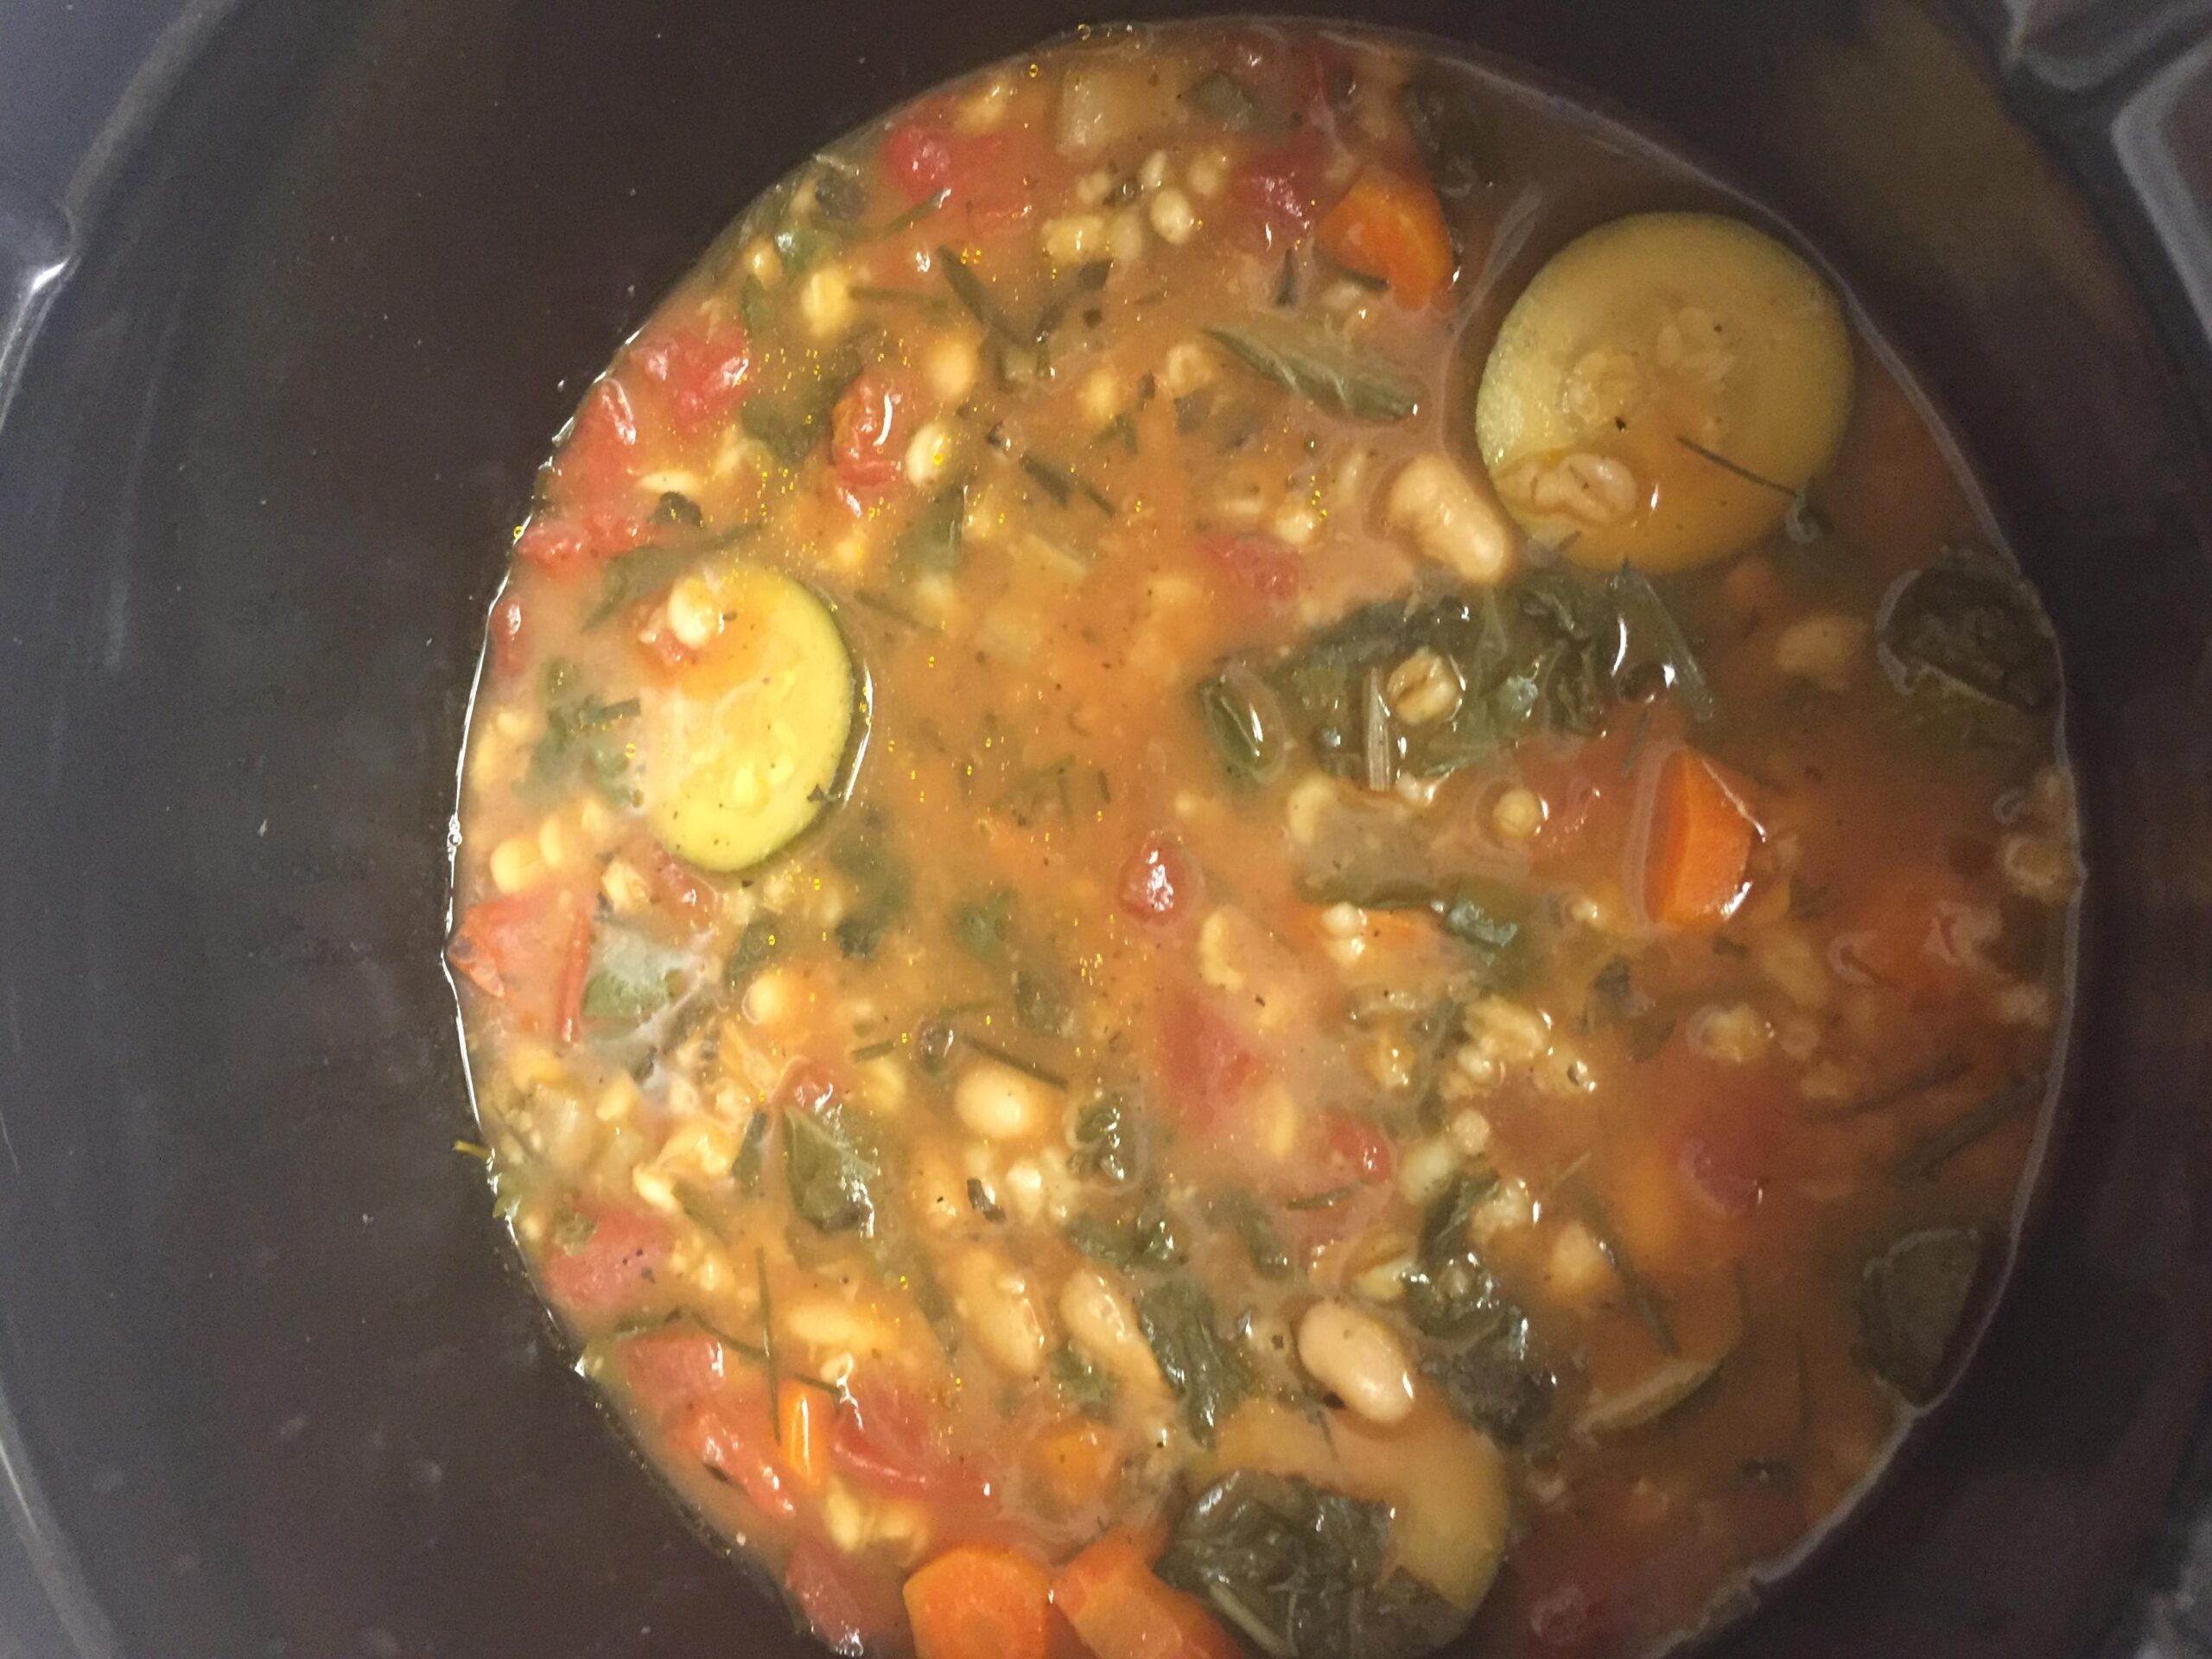  A warm hug in a bowl, my homemade Vegetarian Minestrone Soup